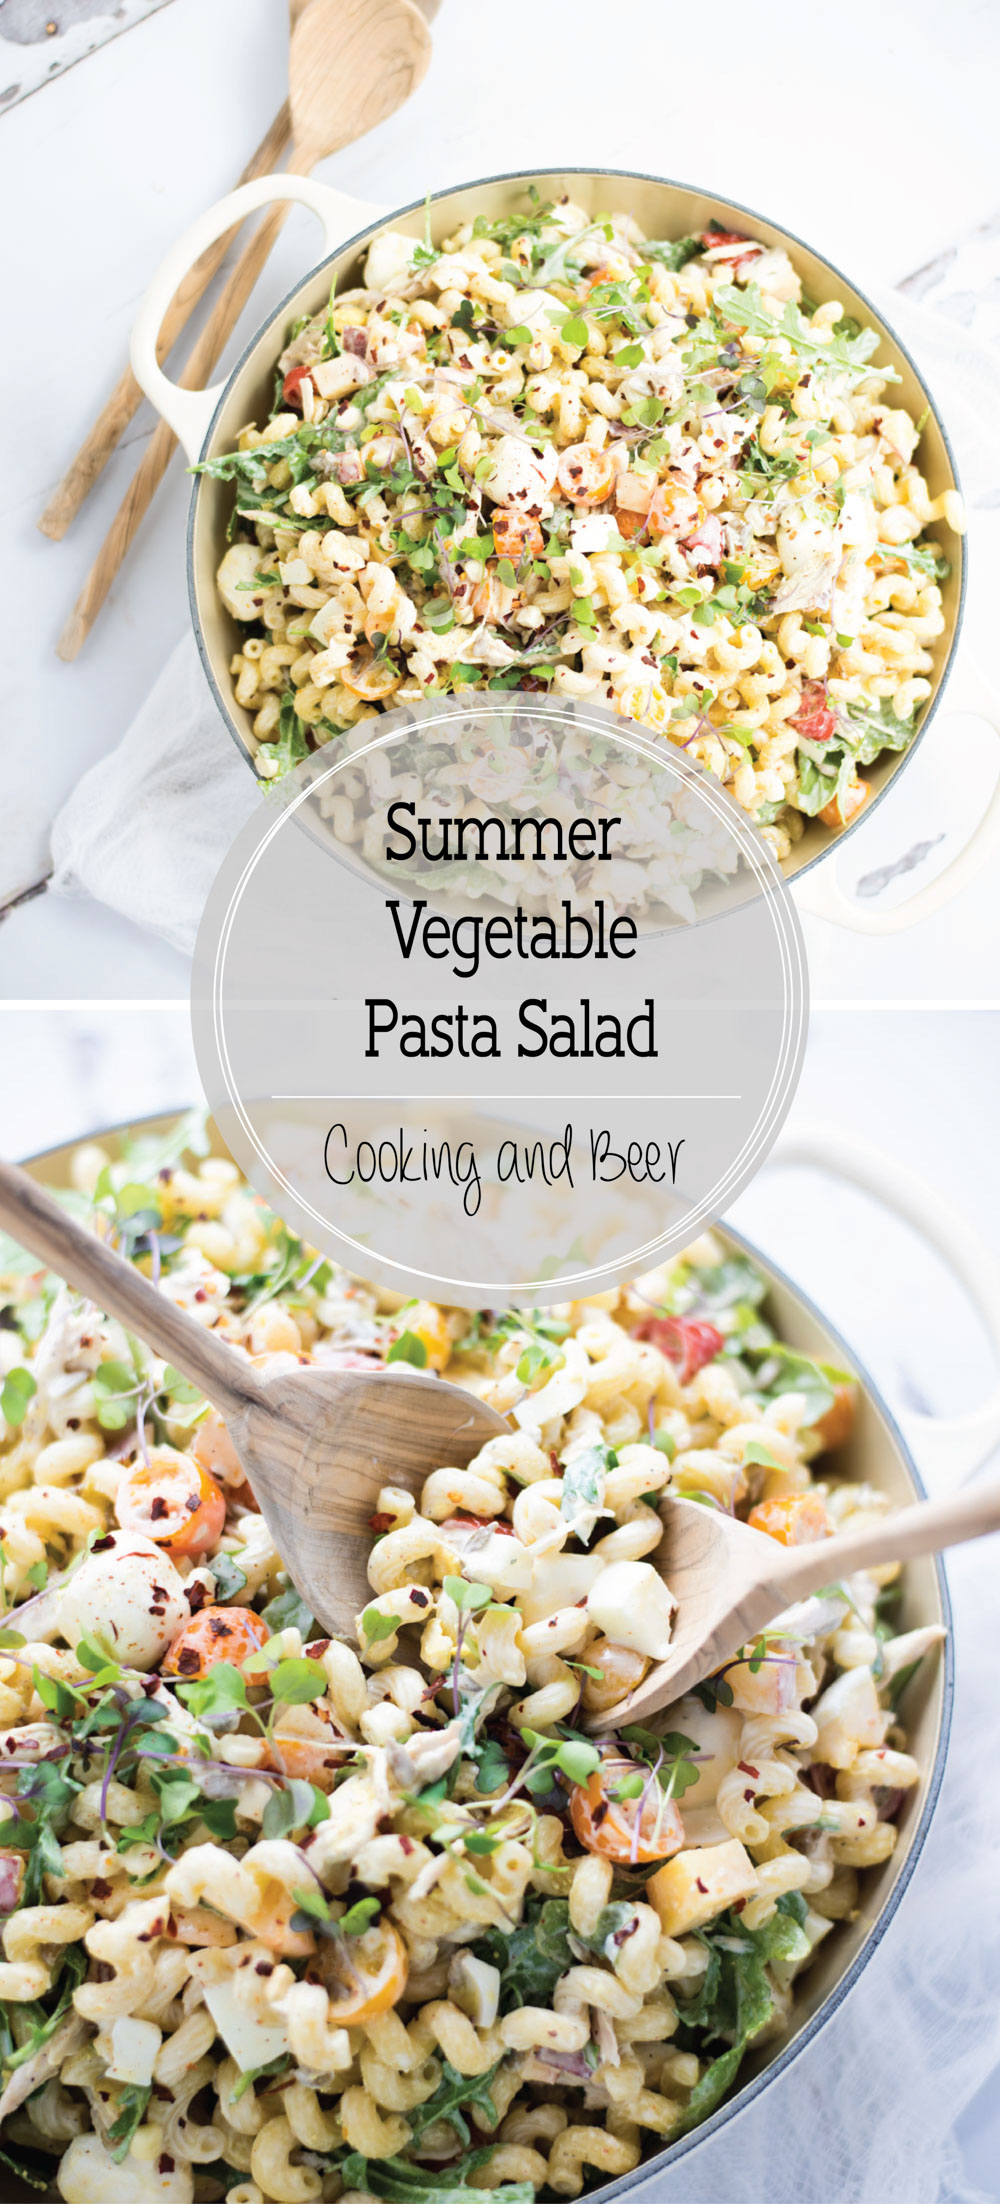 Summer Vegetable Pasta Salad is the perfect side dish for your summer picnics!